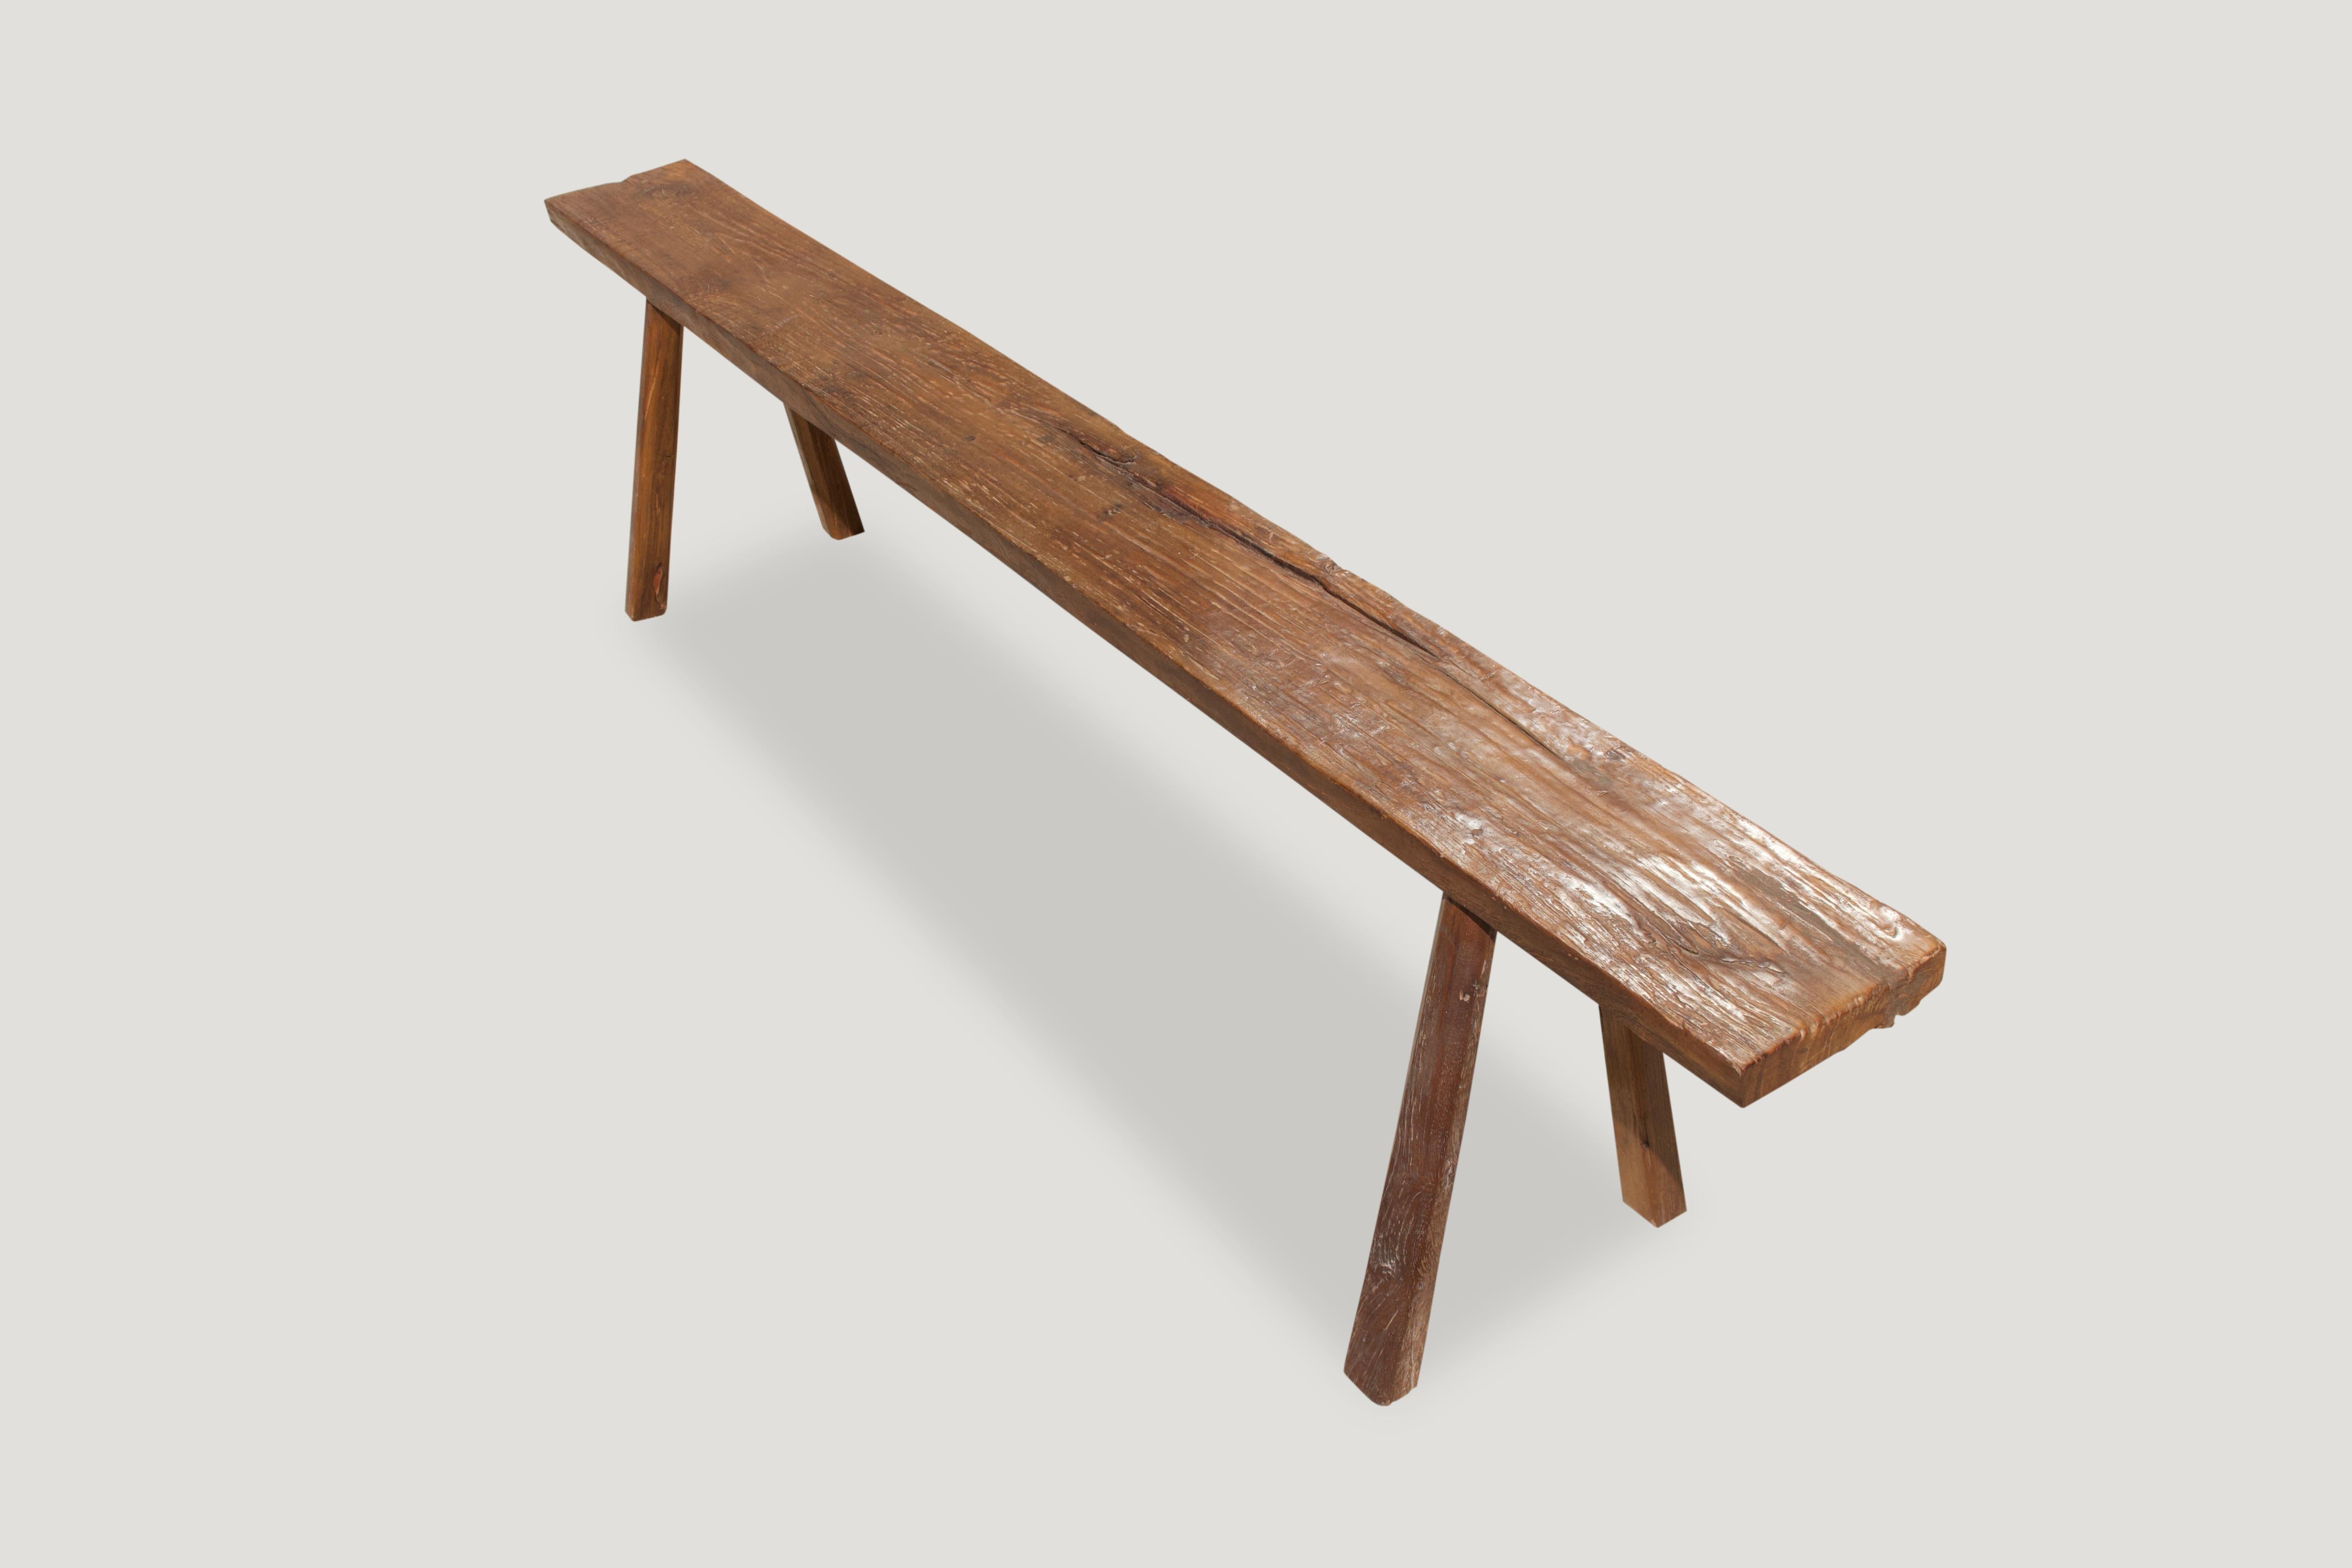 Wabi Sabi teak wood bench. Perfect for inside or outside living.

This bench was sourced in the spirit of wabi-sabi, a Japanese philosophy that beauty can be found in imperfection and impermanence. It’s a beauty of things modest and humble. It’s a